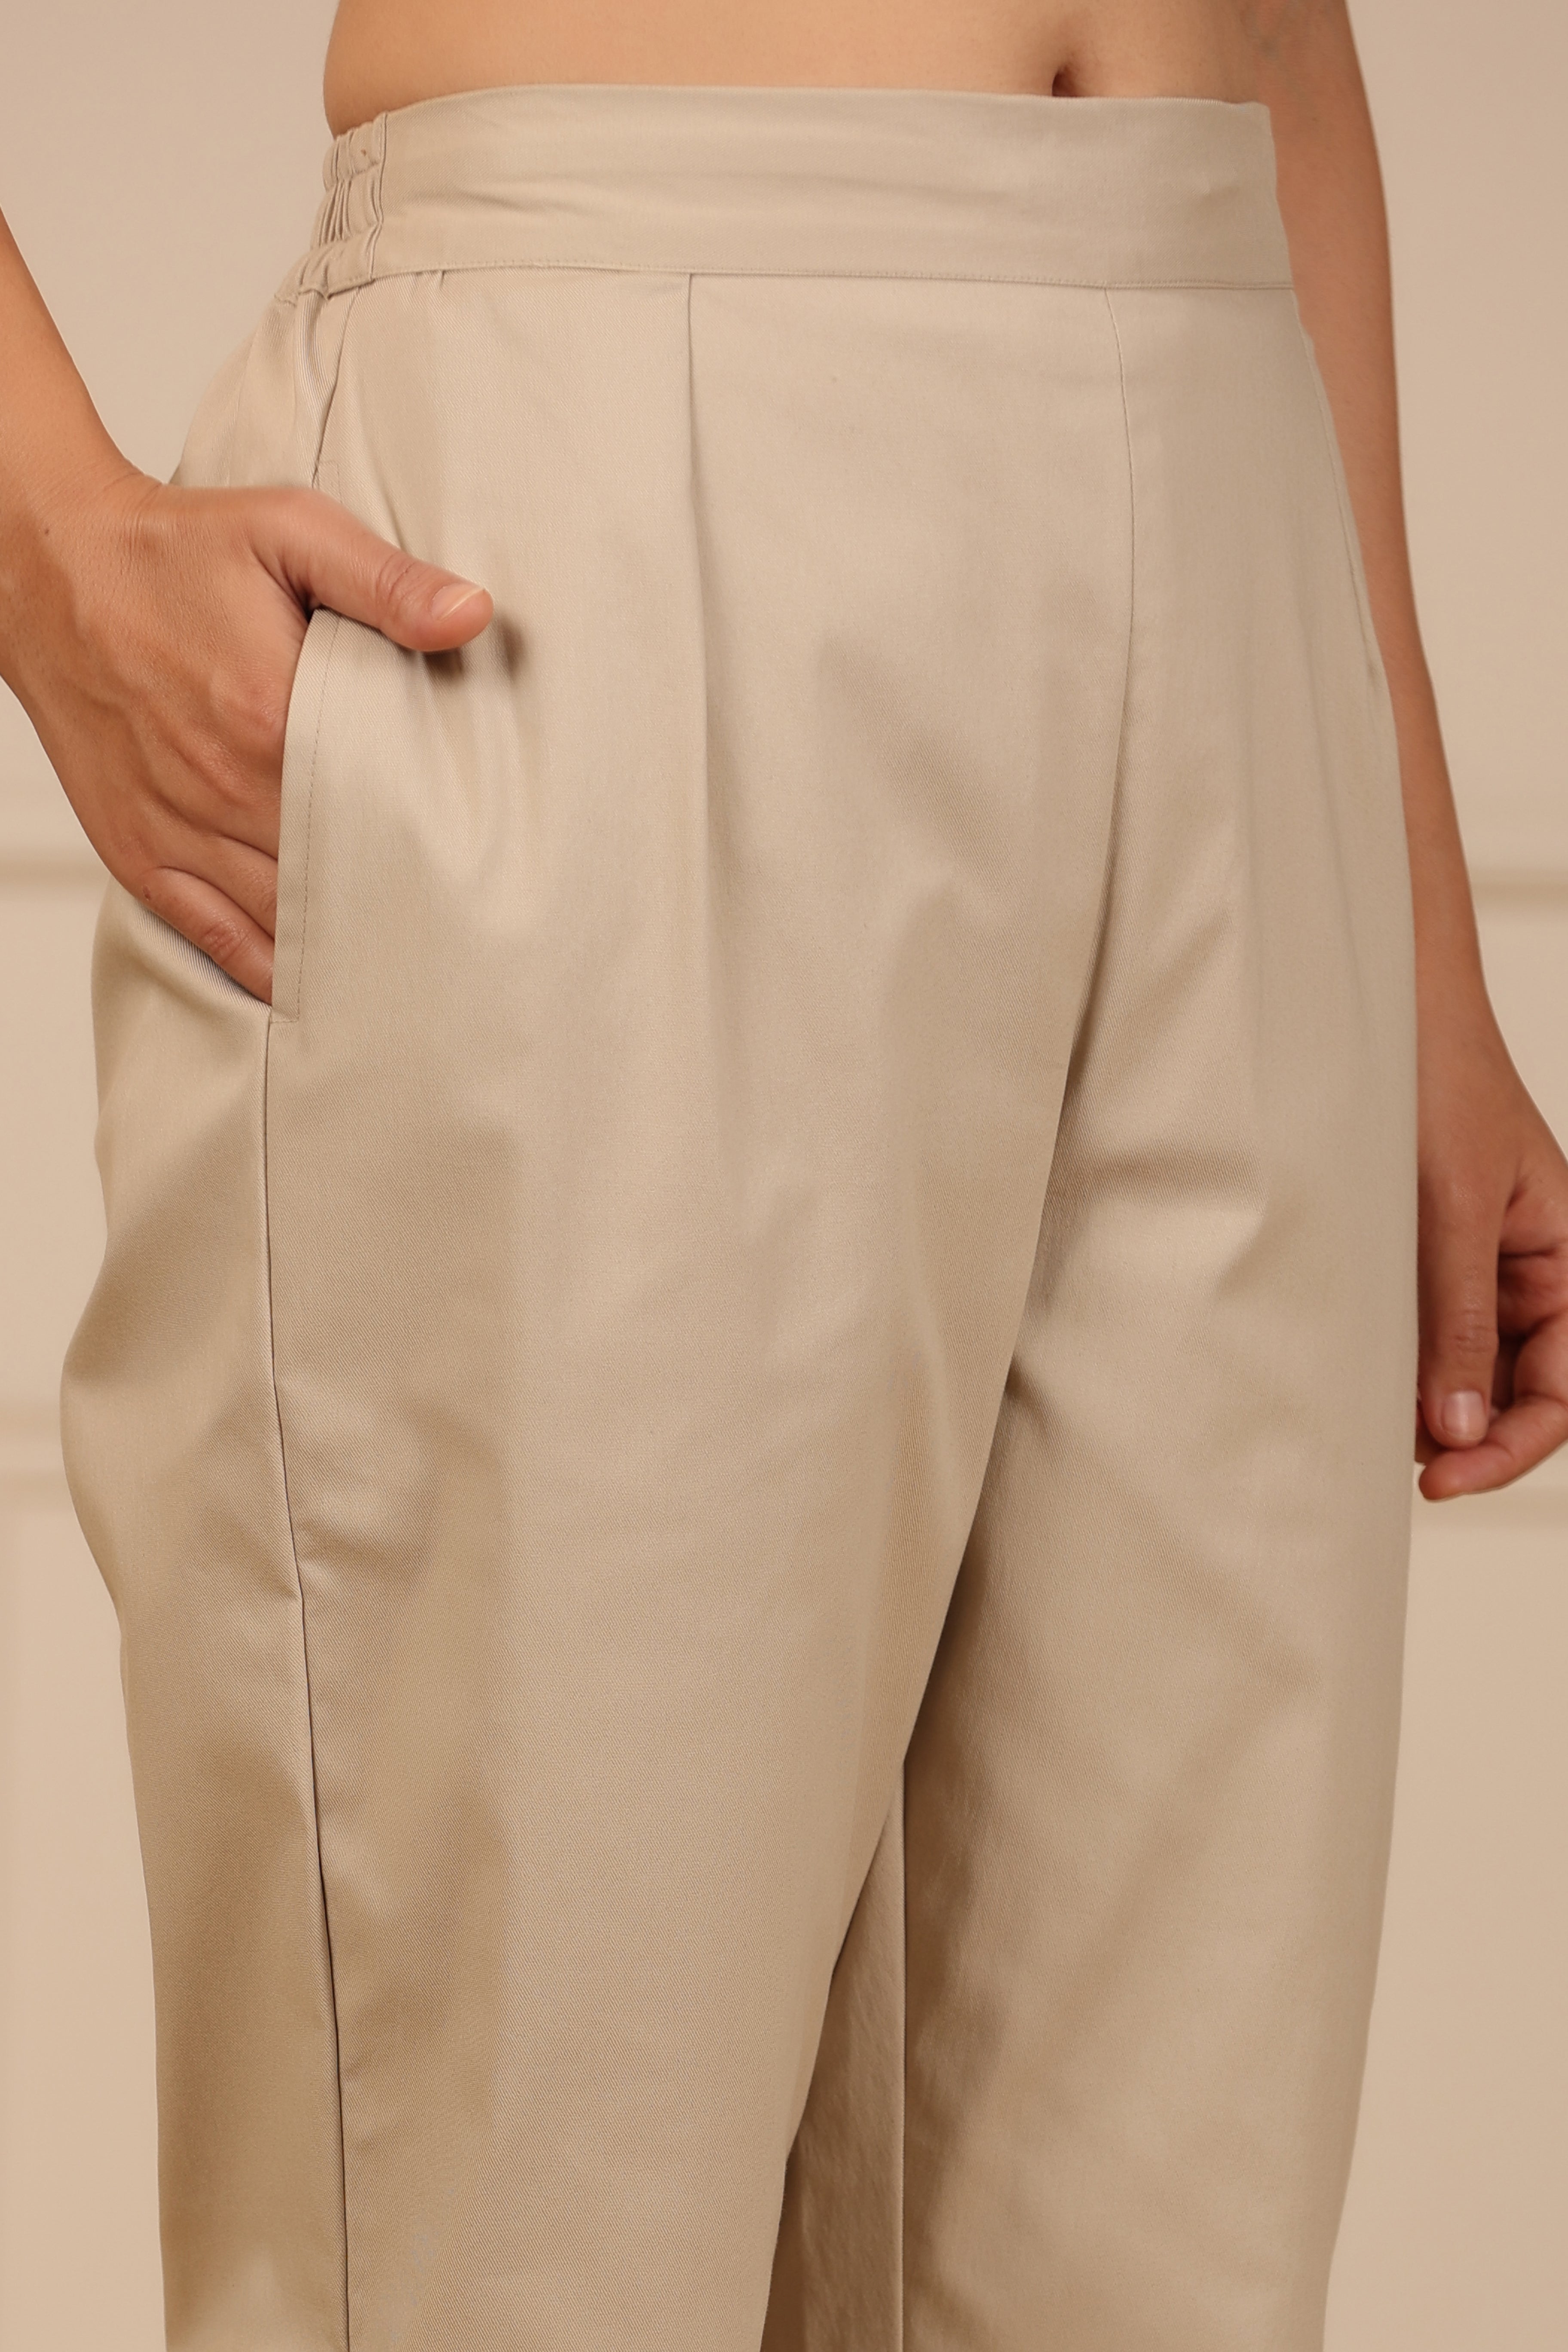 Buy Nelly Easy Paperbag Pants - Beige | Nelly.com